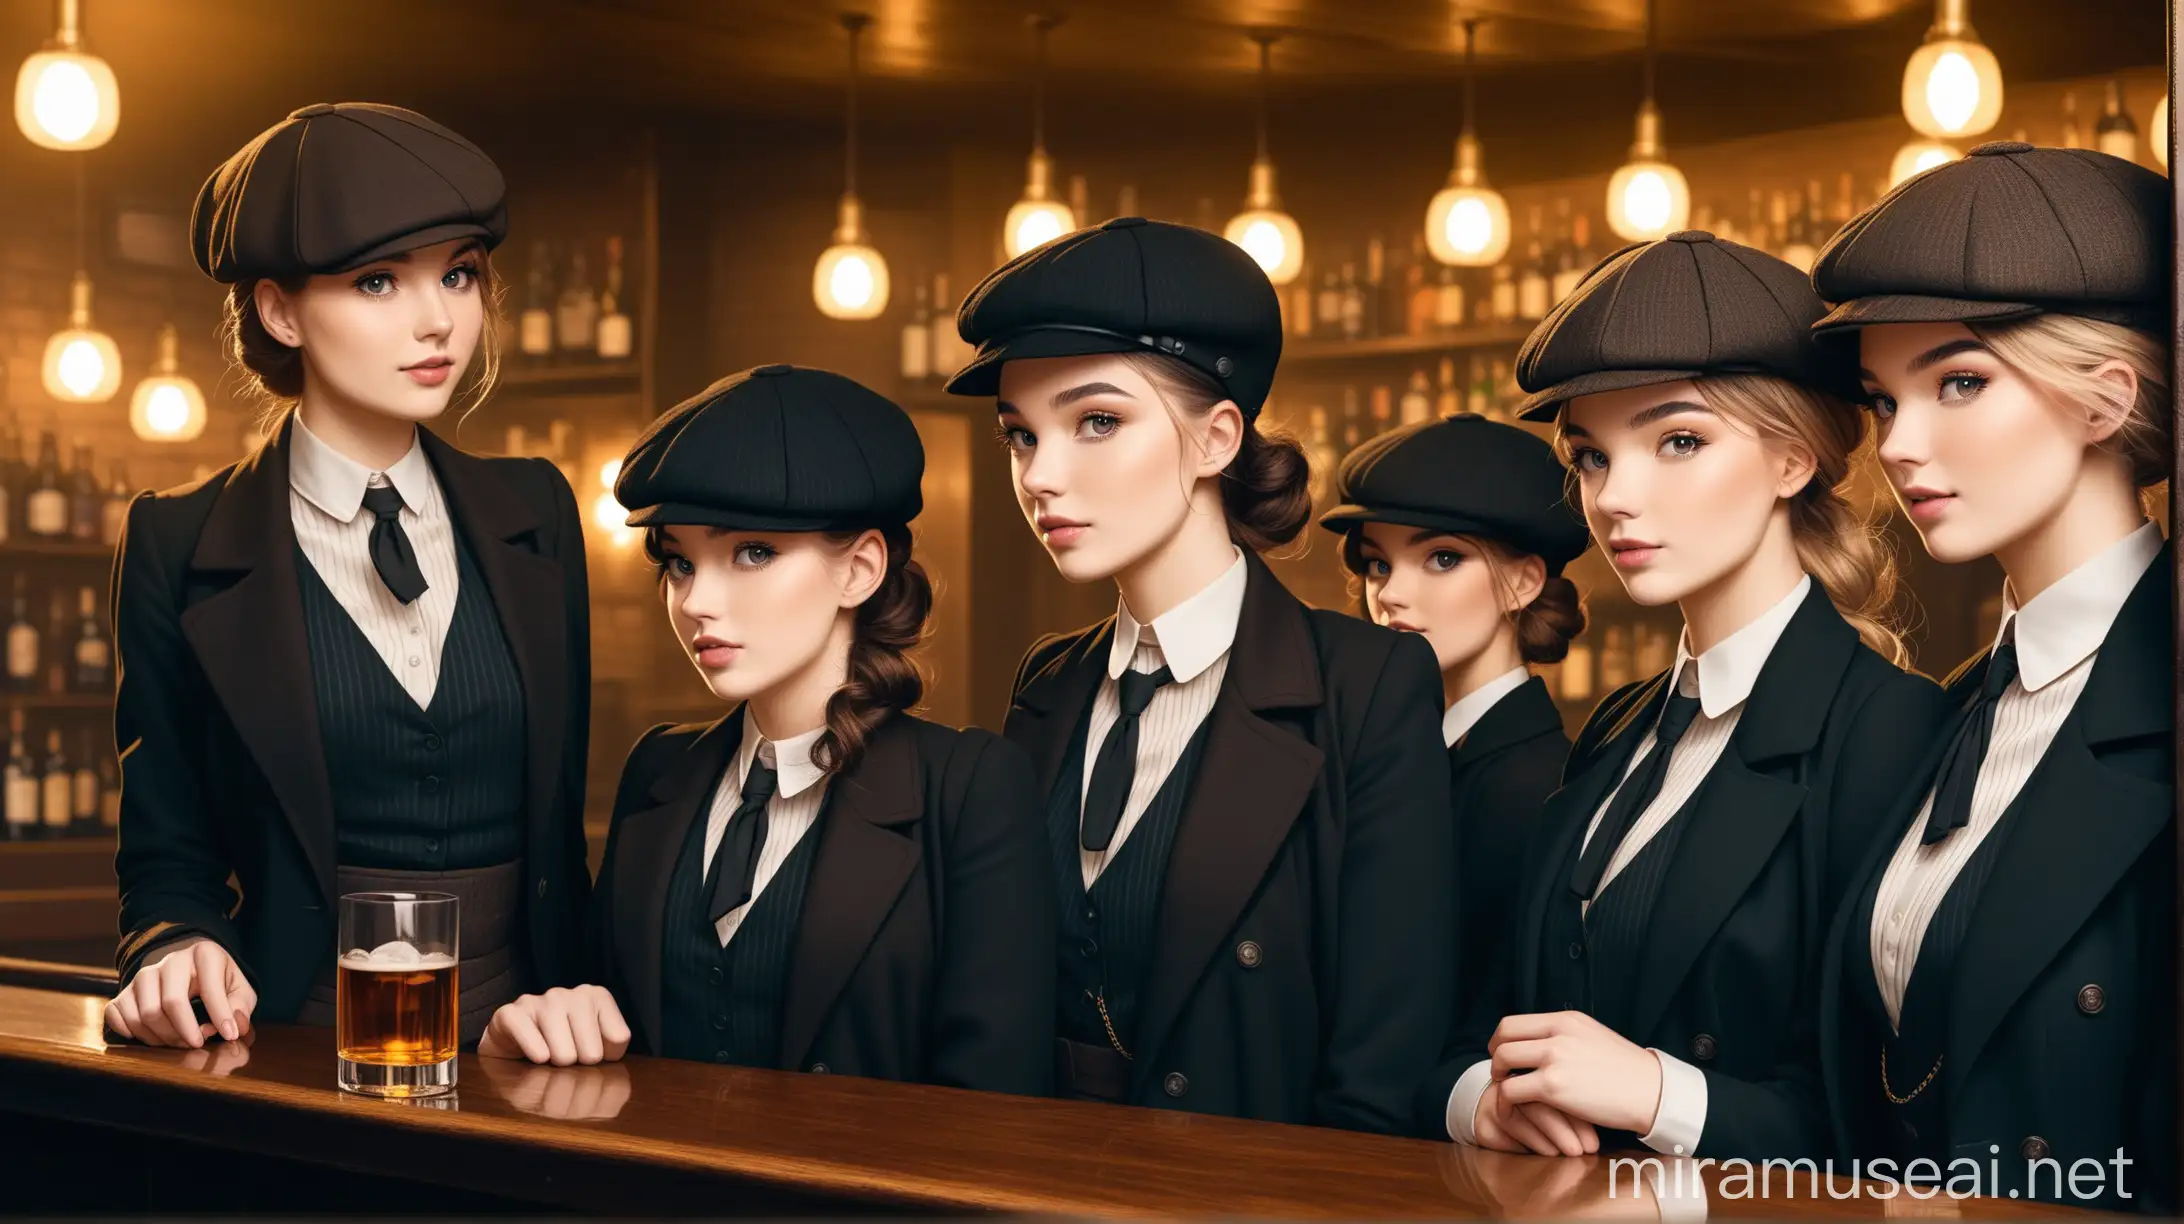 Stylish Women in Peaky Blinders Attire Gather at a Retro Bar